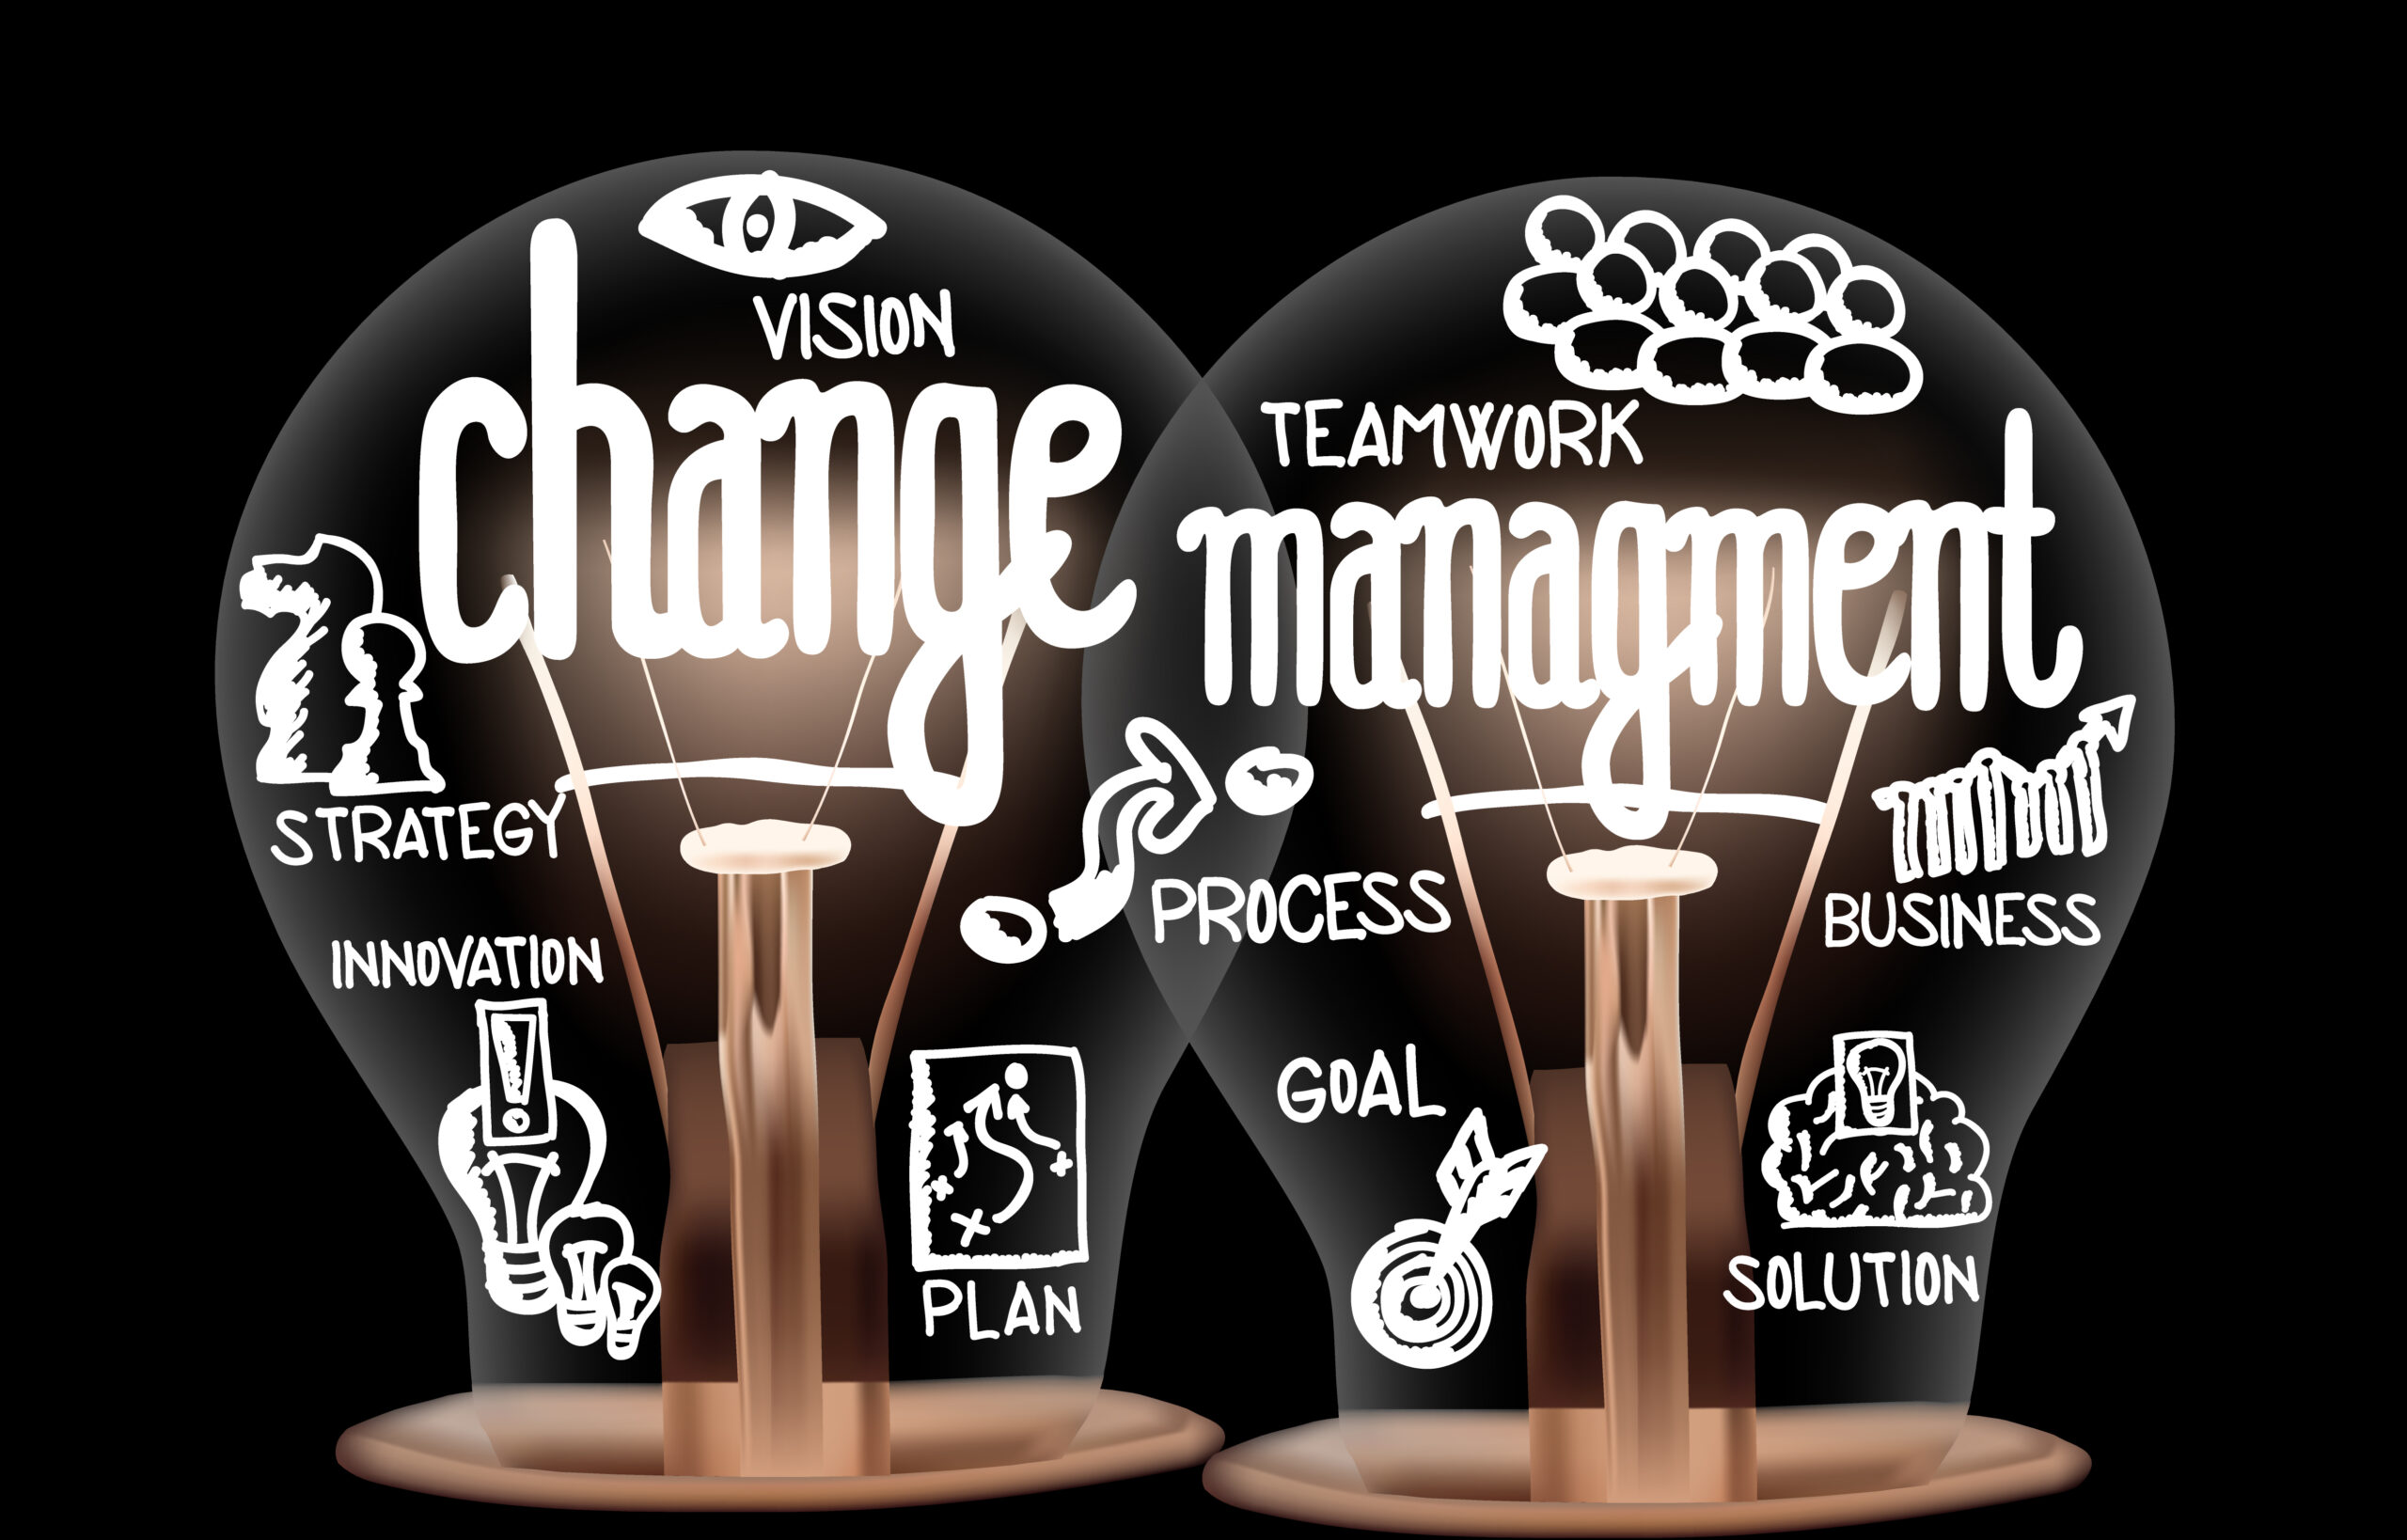 Featured image for “Leading Change in a Changing Environment”